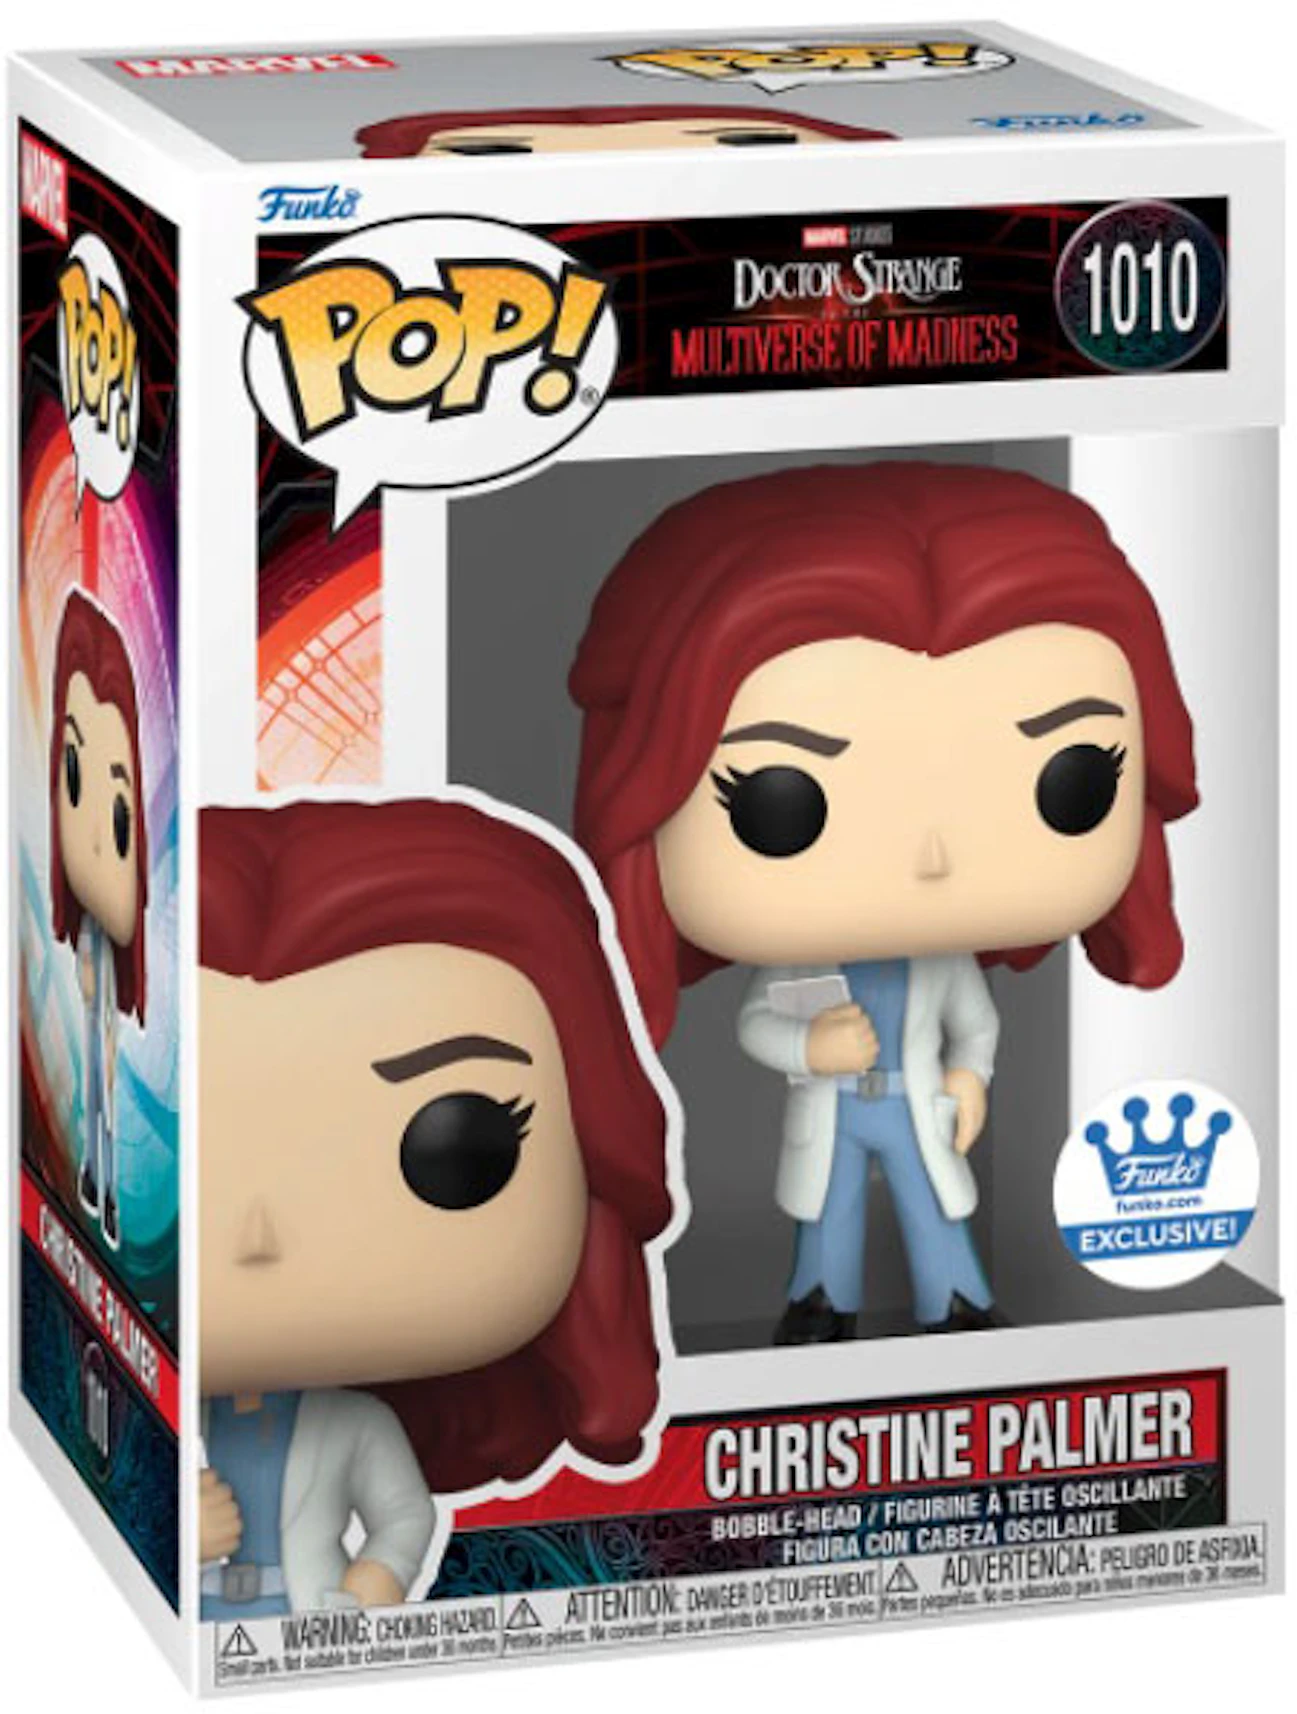 Funko Marvel Doctor in the Multiverse of Madness Christine Palmer Funko Shop Exclusive Figure #1010 - US